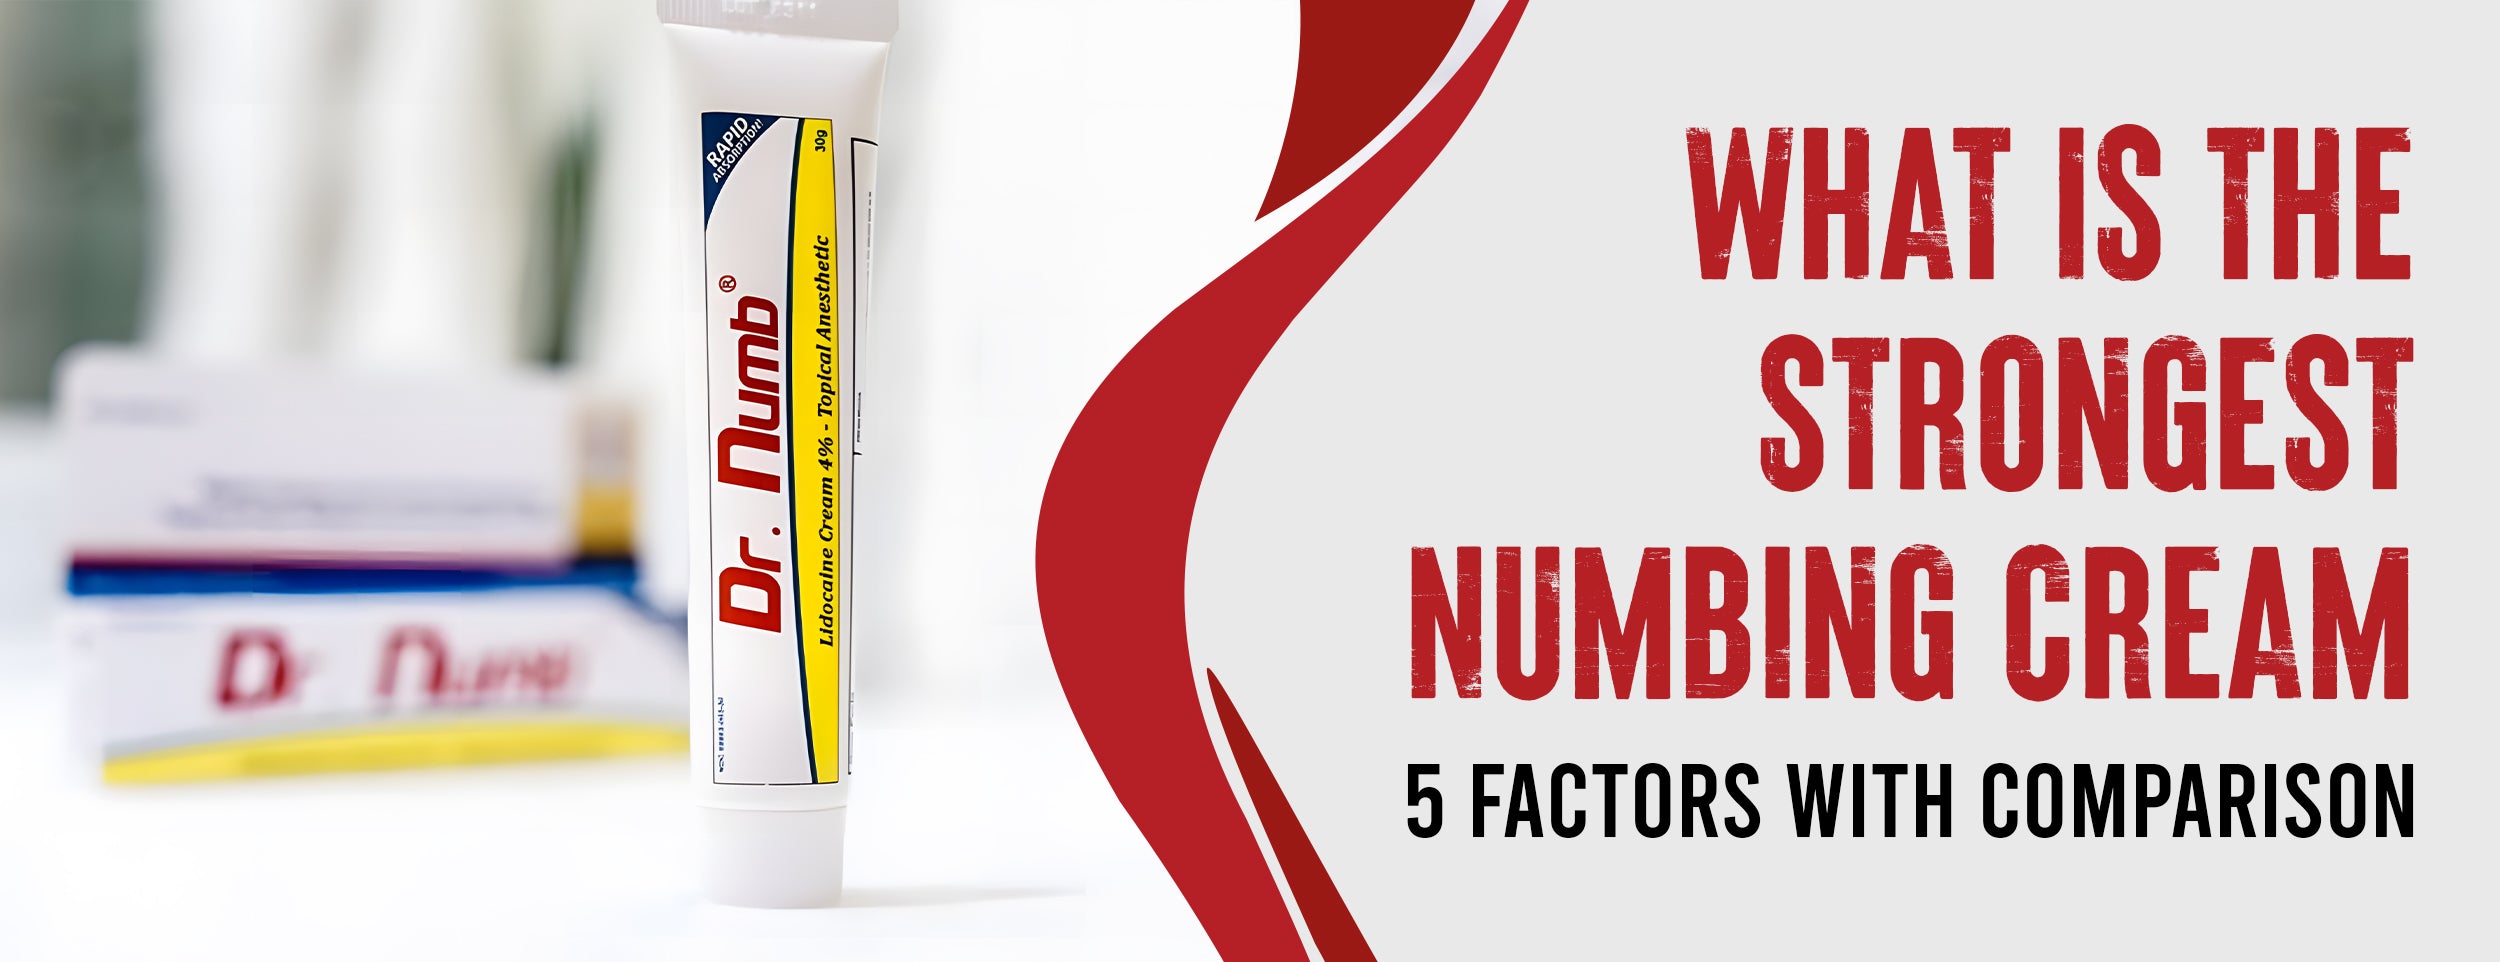 5 Factors to Consider When Choosing a Numbing Cream and Comparison of the Strongest Numbing Creams